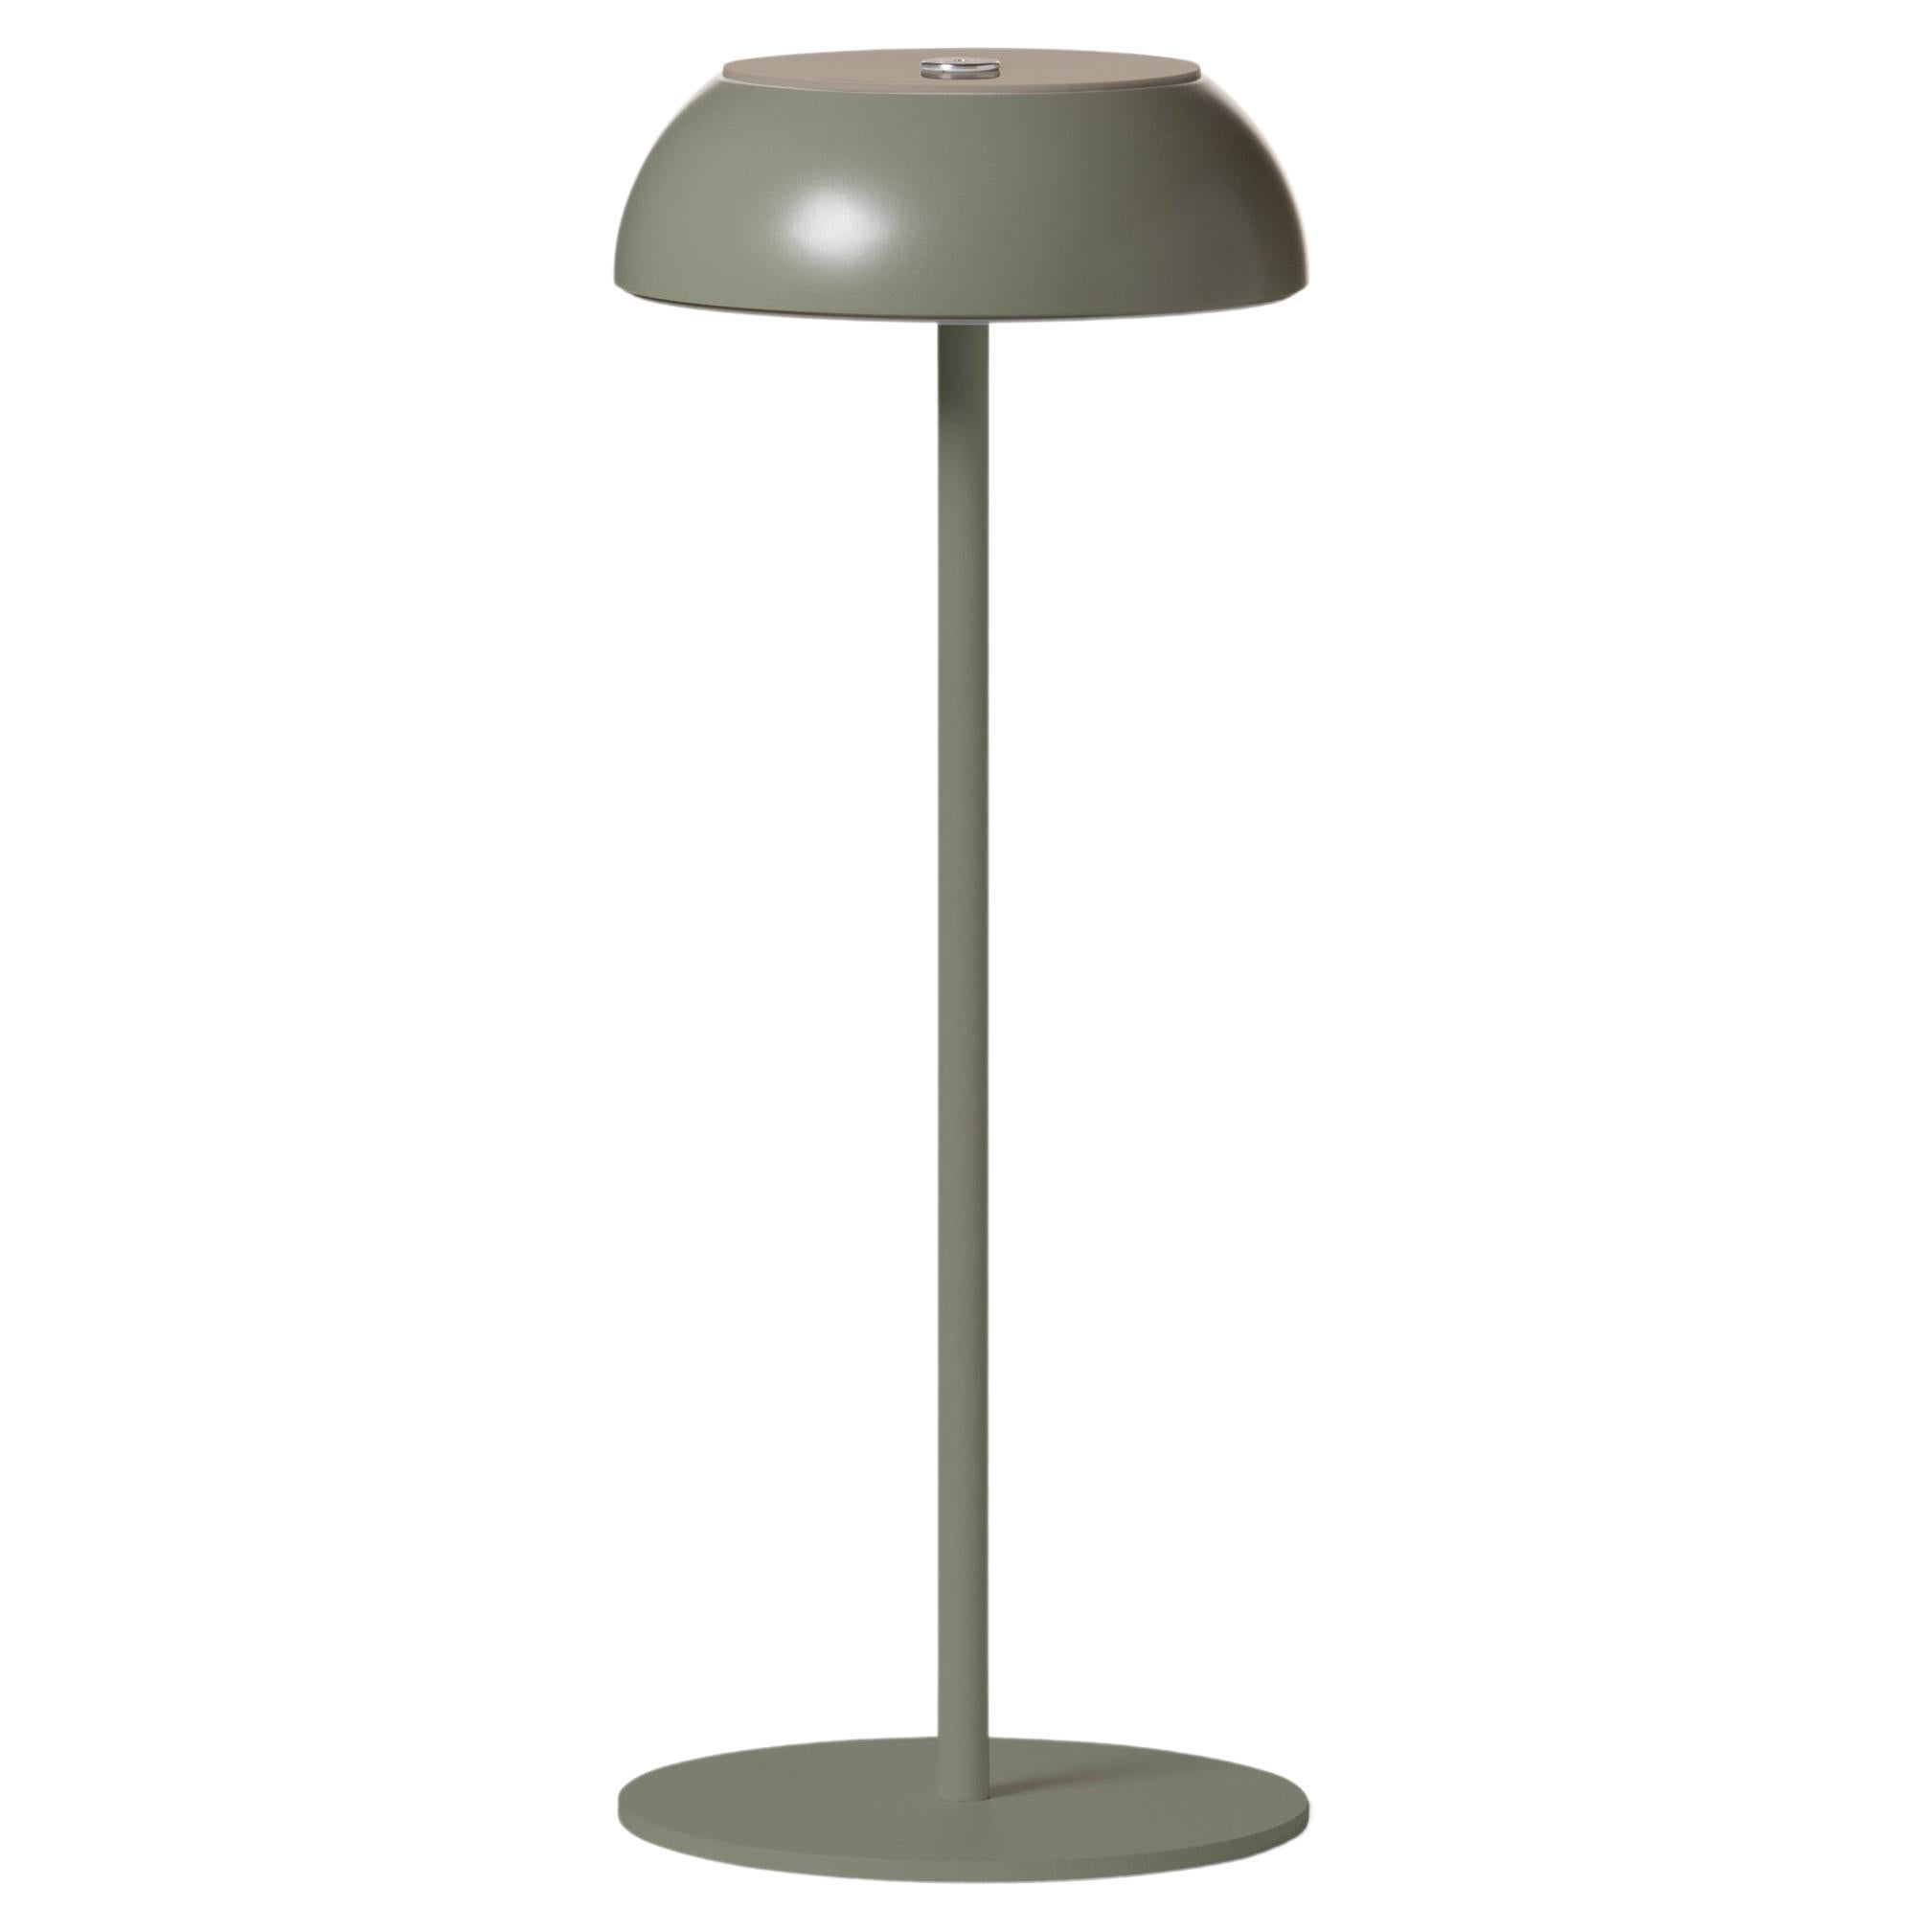 Axolight Float Table Lamp in Concrete Green Aluminum & Steel by Mario Alessiani For Sale